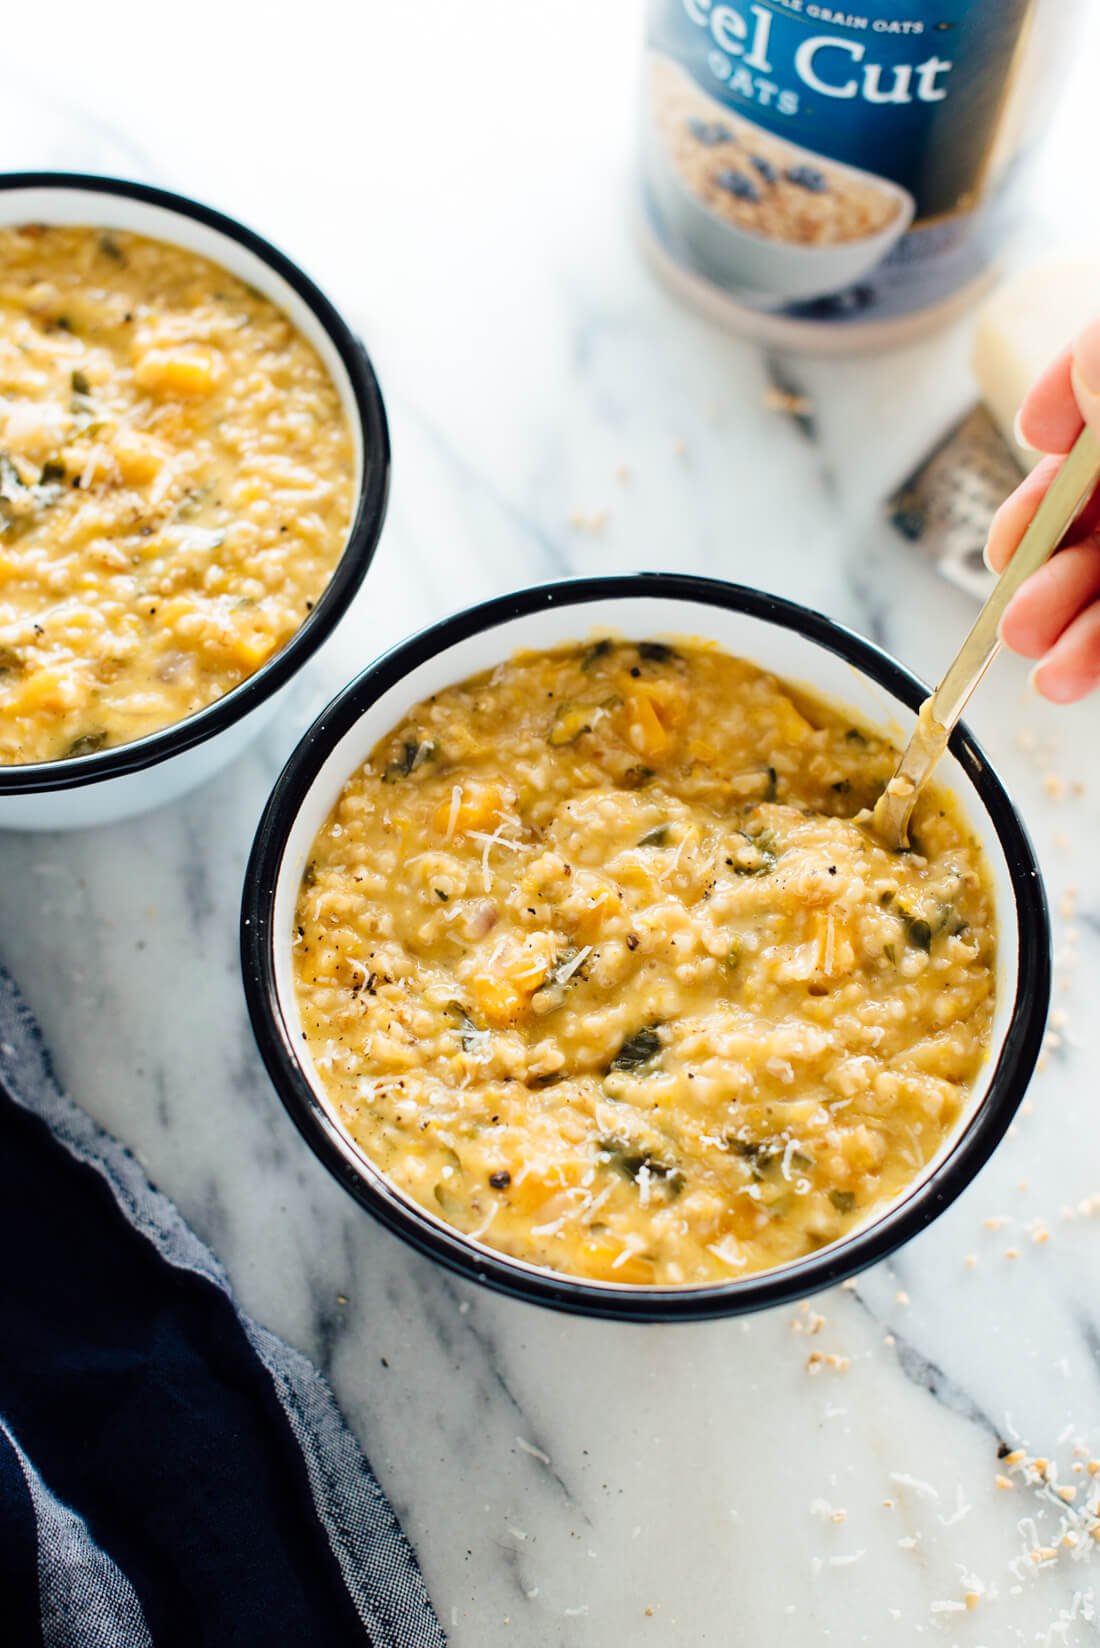 Creamy, dreamy "risotto" made with butternut squash and kale!